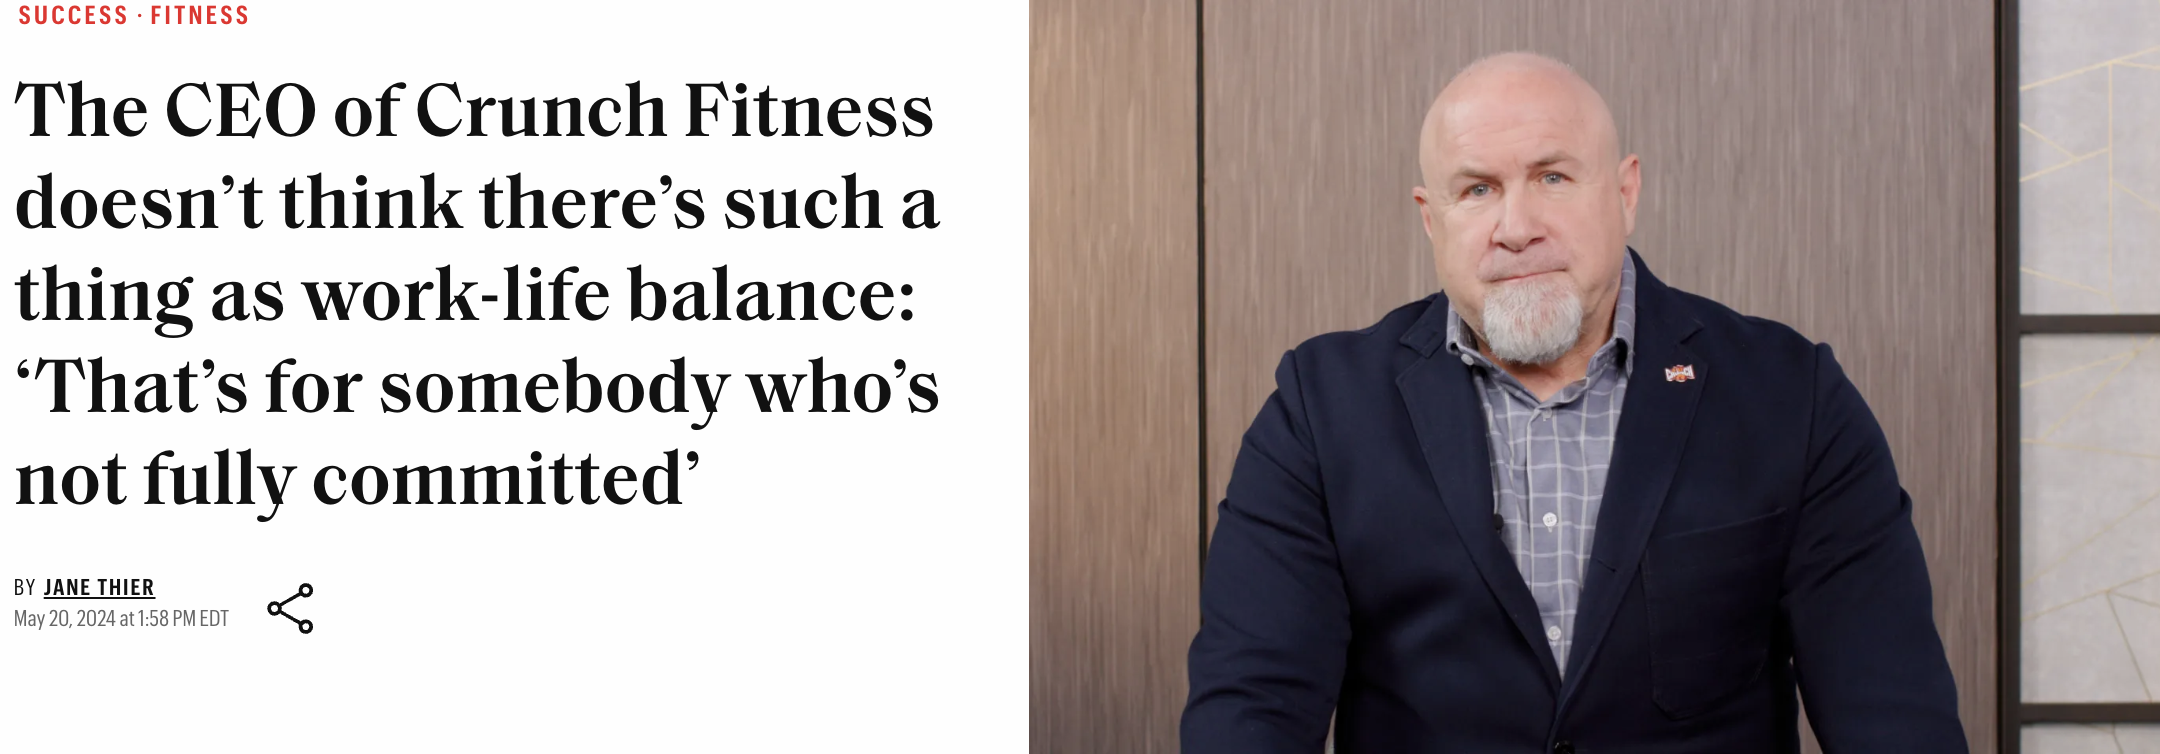 gentleman - Success Fitness The Ceo of Crunch Fitness doesn't think there's such a thing as worklife balance "That's for somebody who's not fully committed' By Jane Thier 158 Pmed